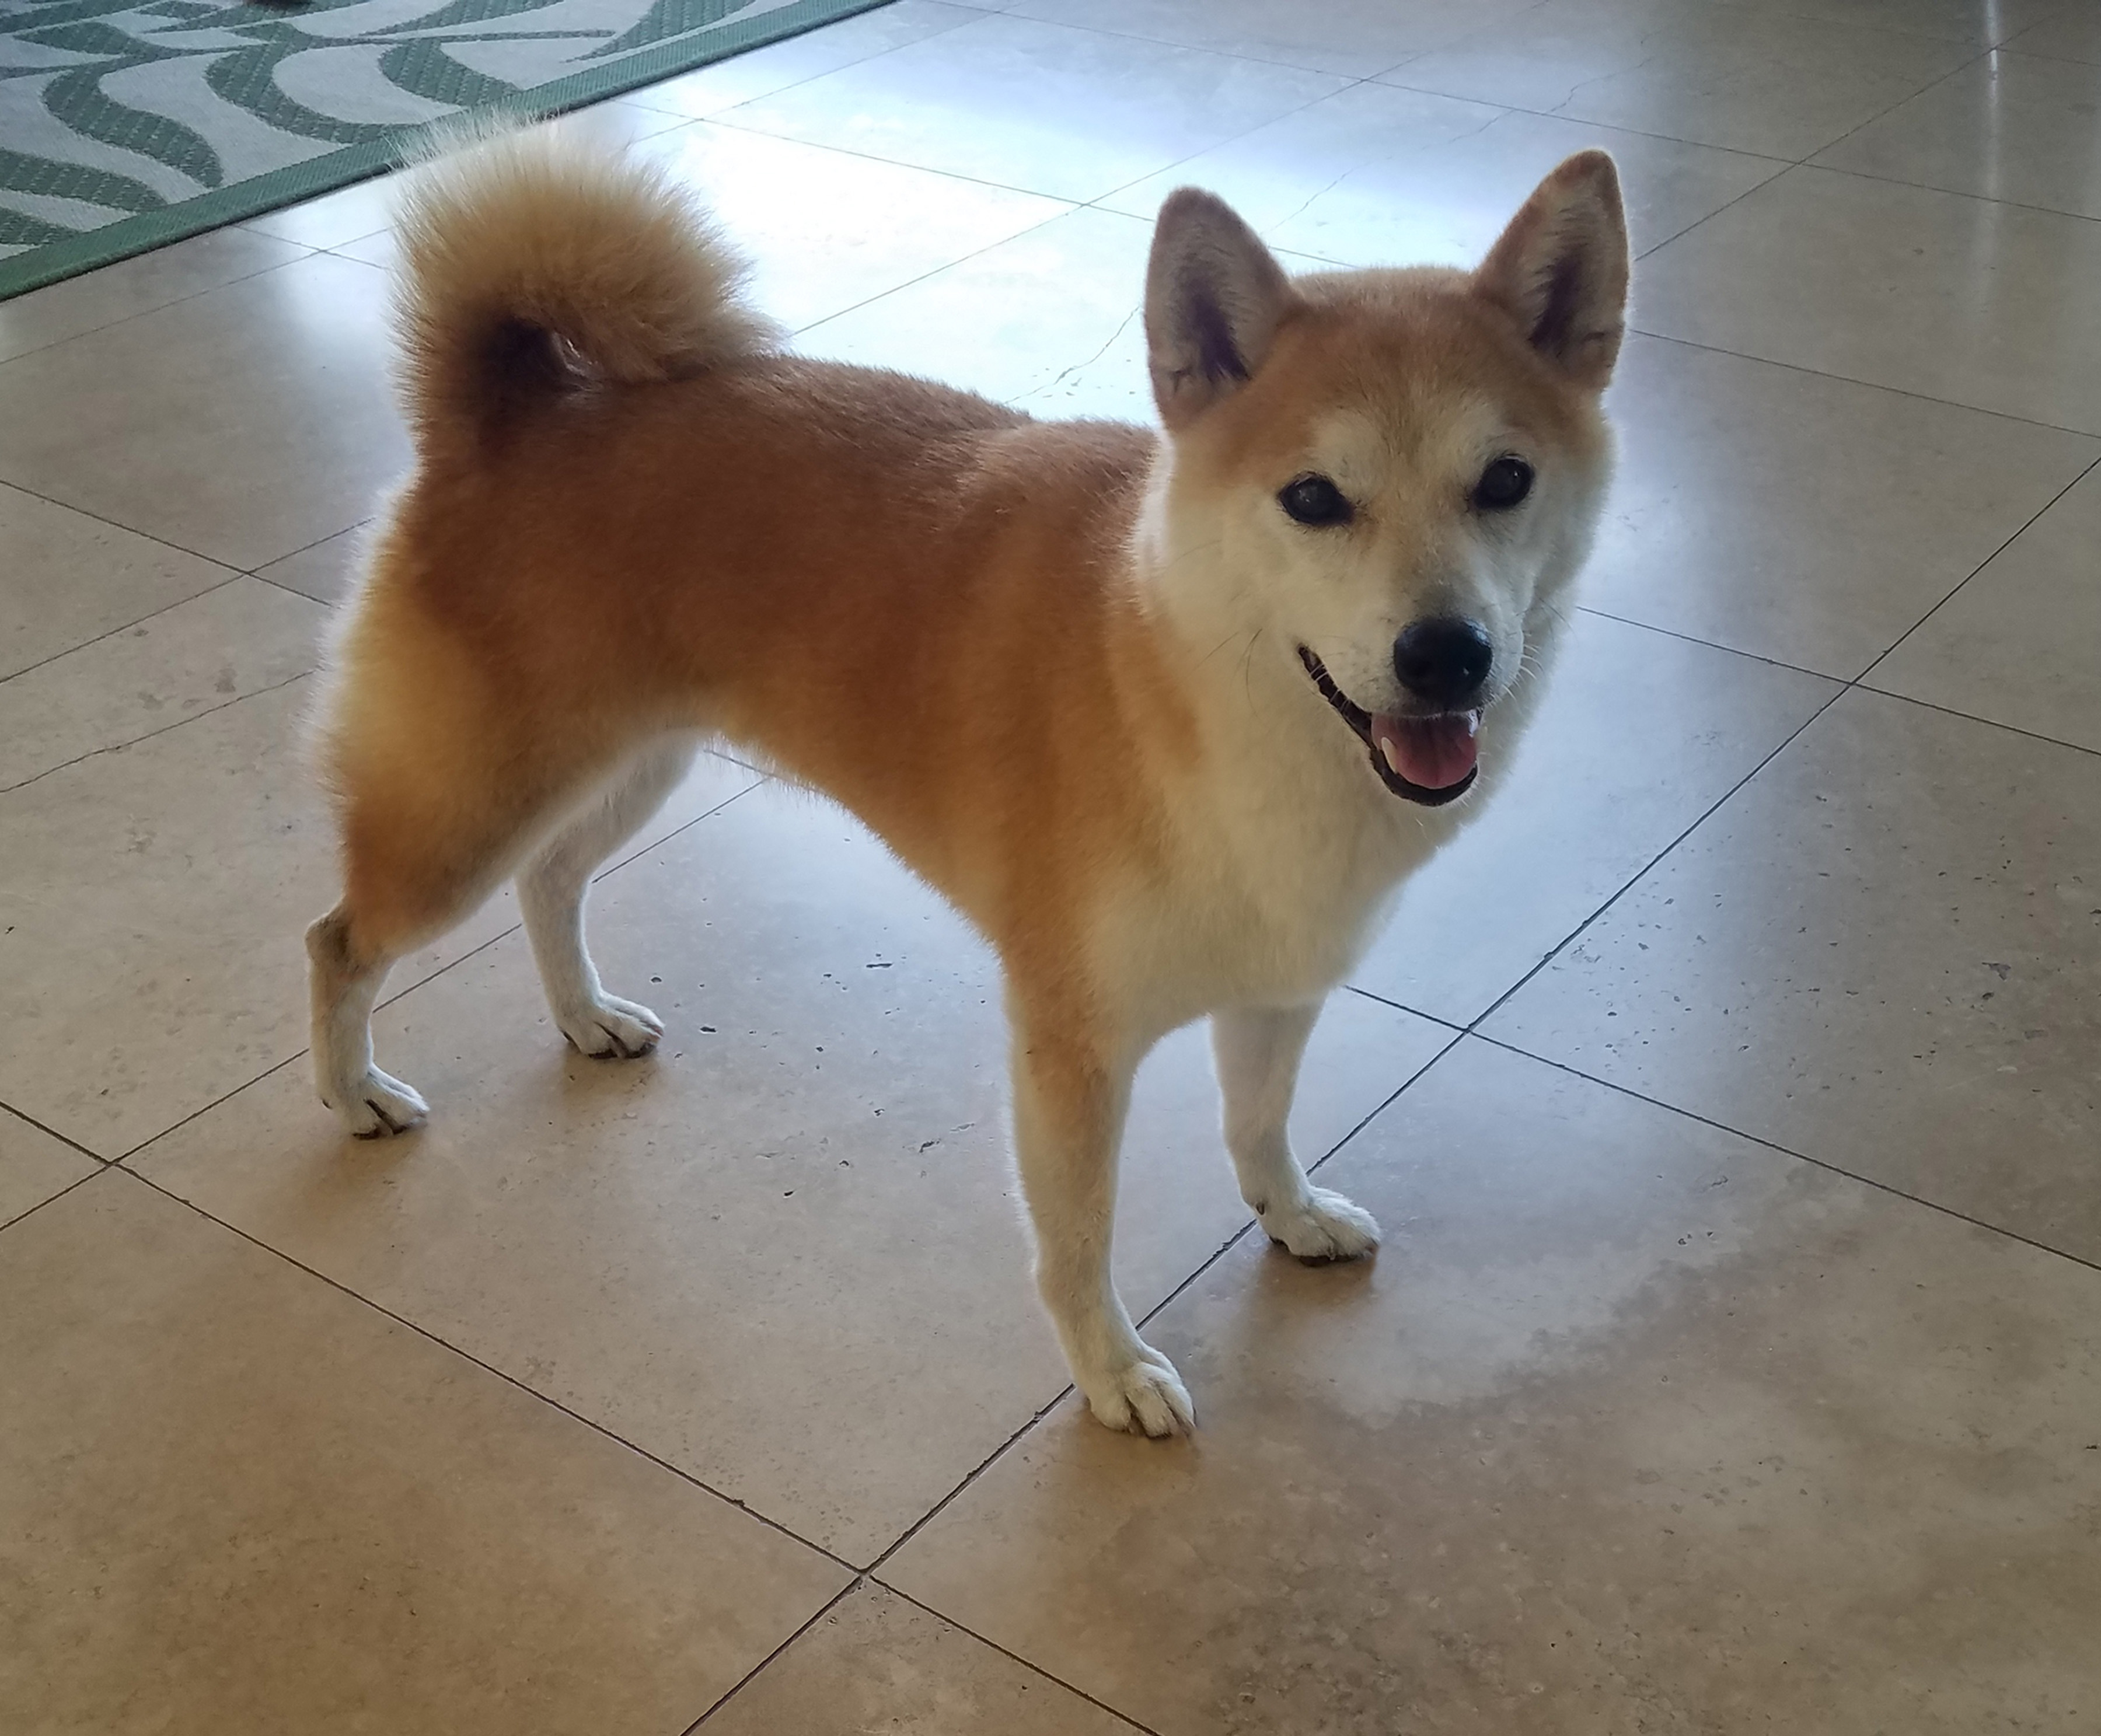 A shiba inu poses for the photo. It is inside a house standing on tiled floors.